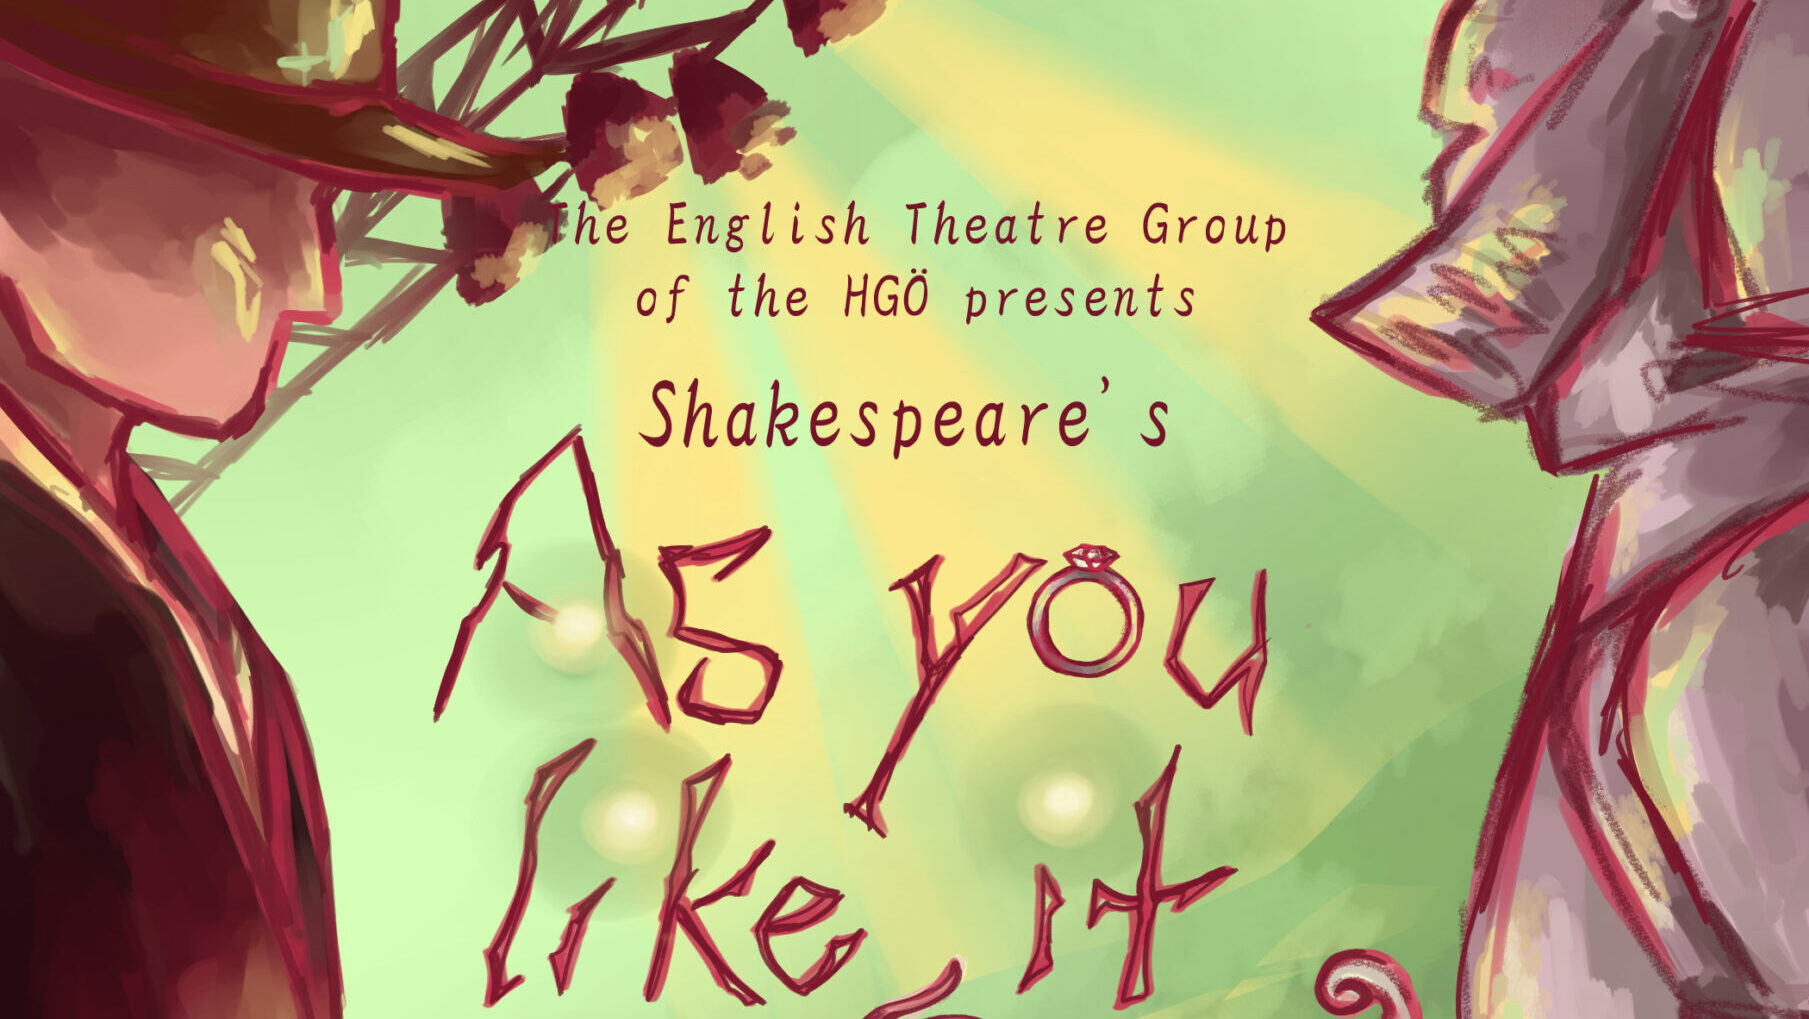 The English-Theatre Group presents: Shakespeare‘s As you like it